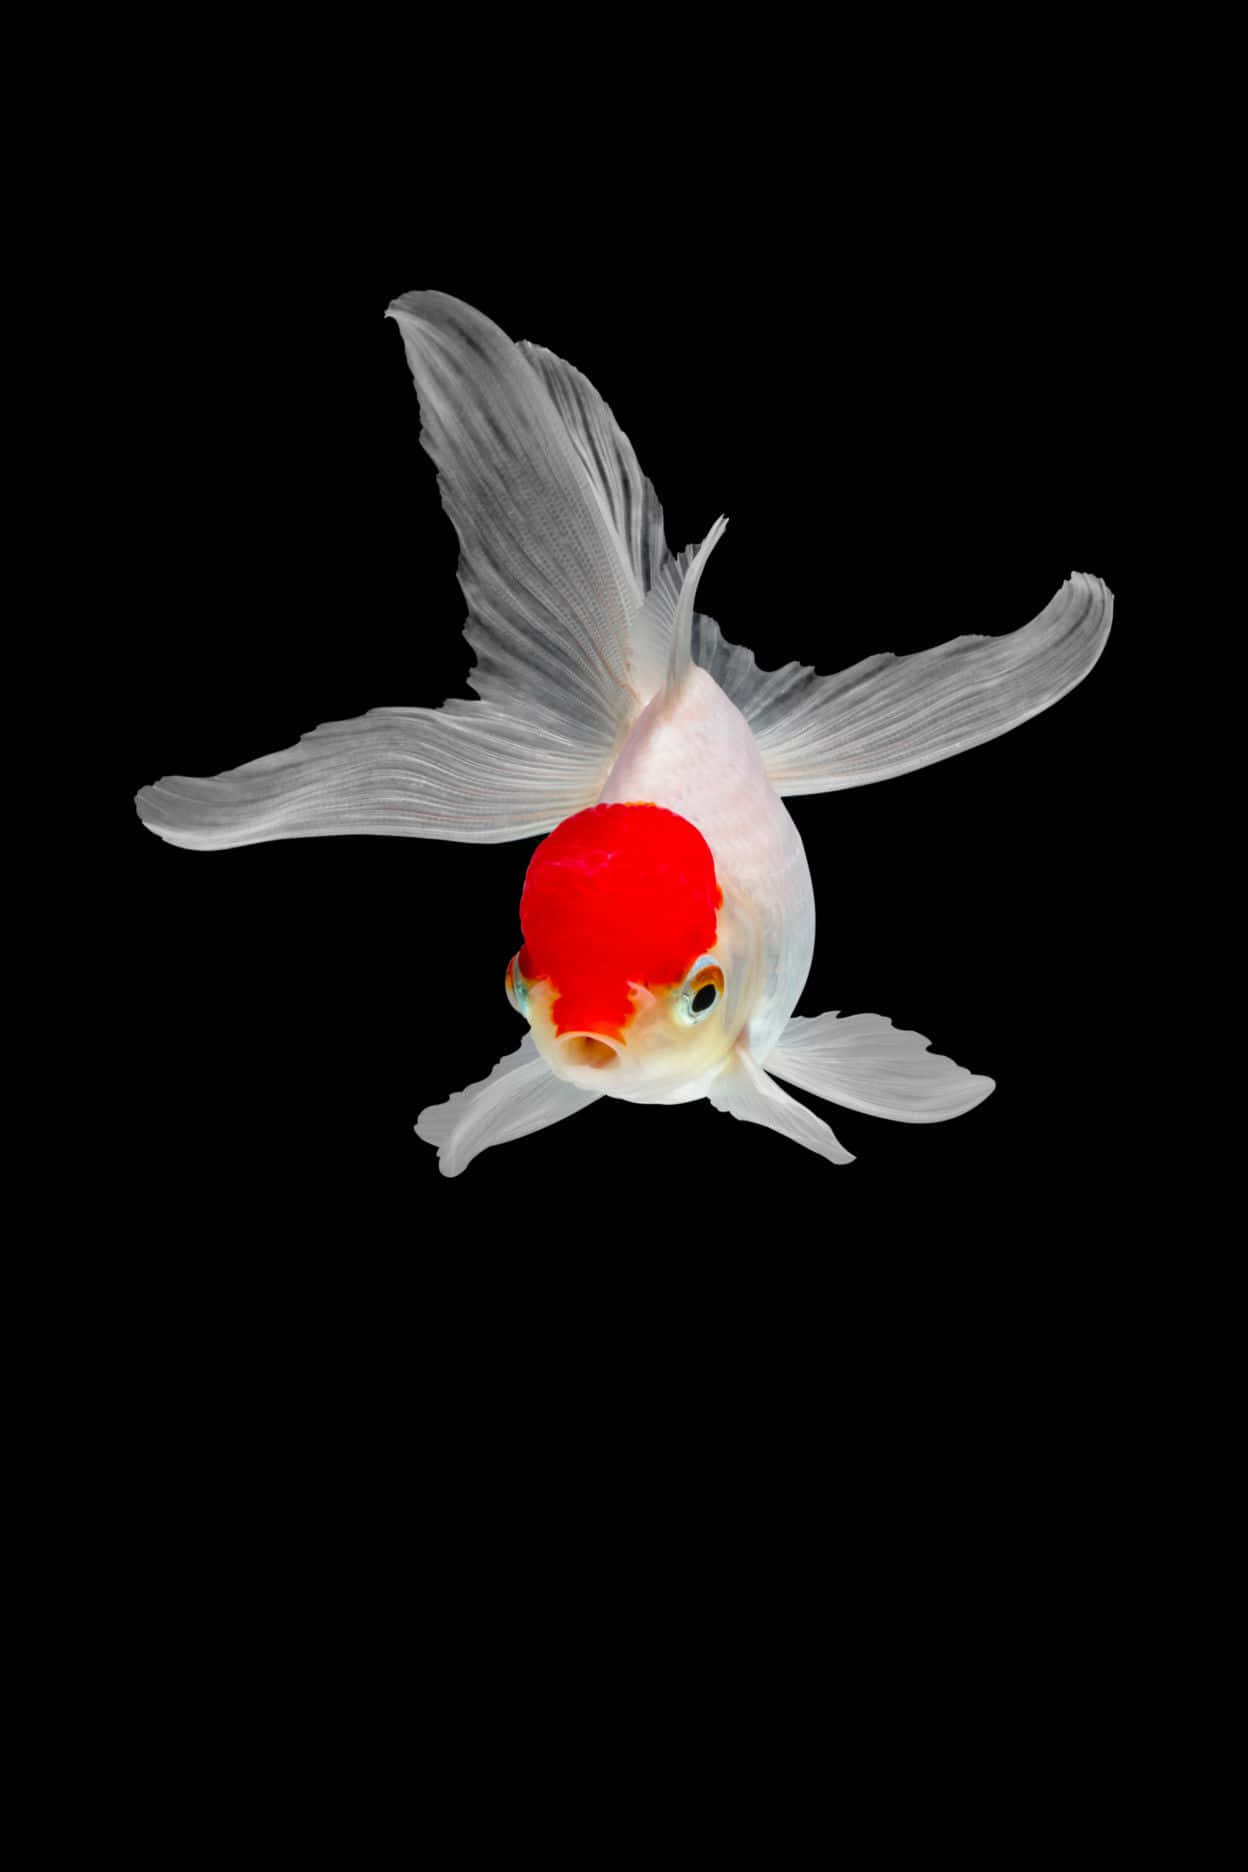 A White Fish With A Red Head On A Black Background